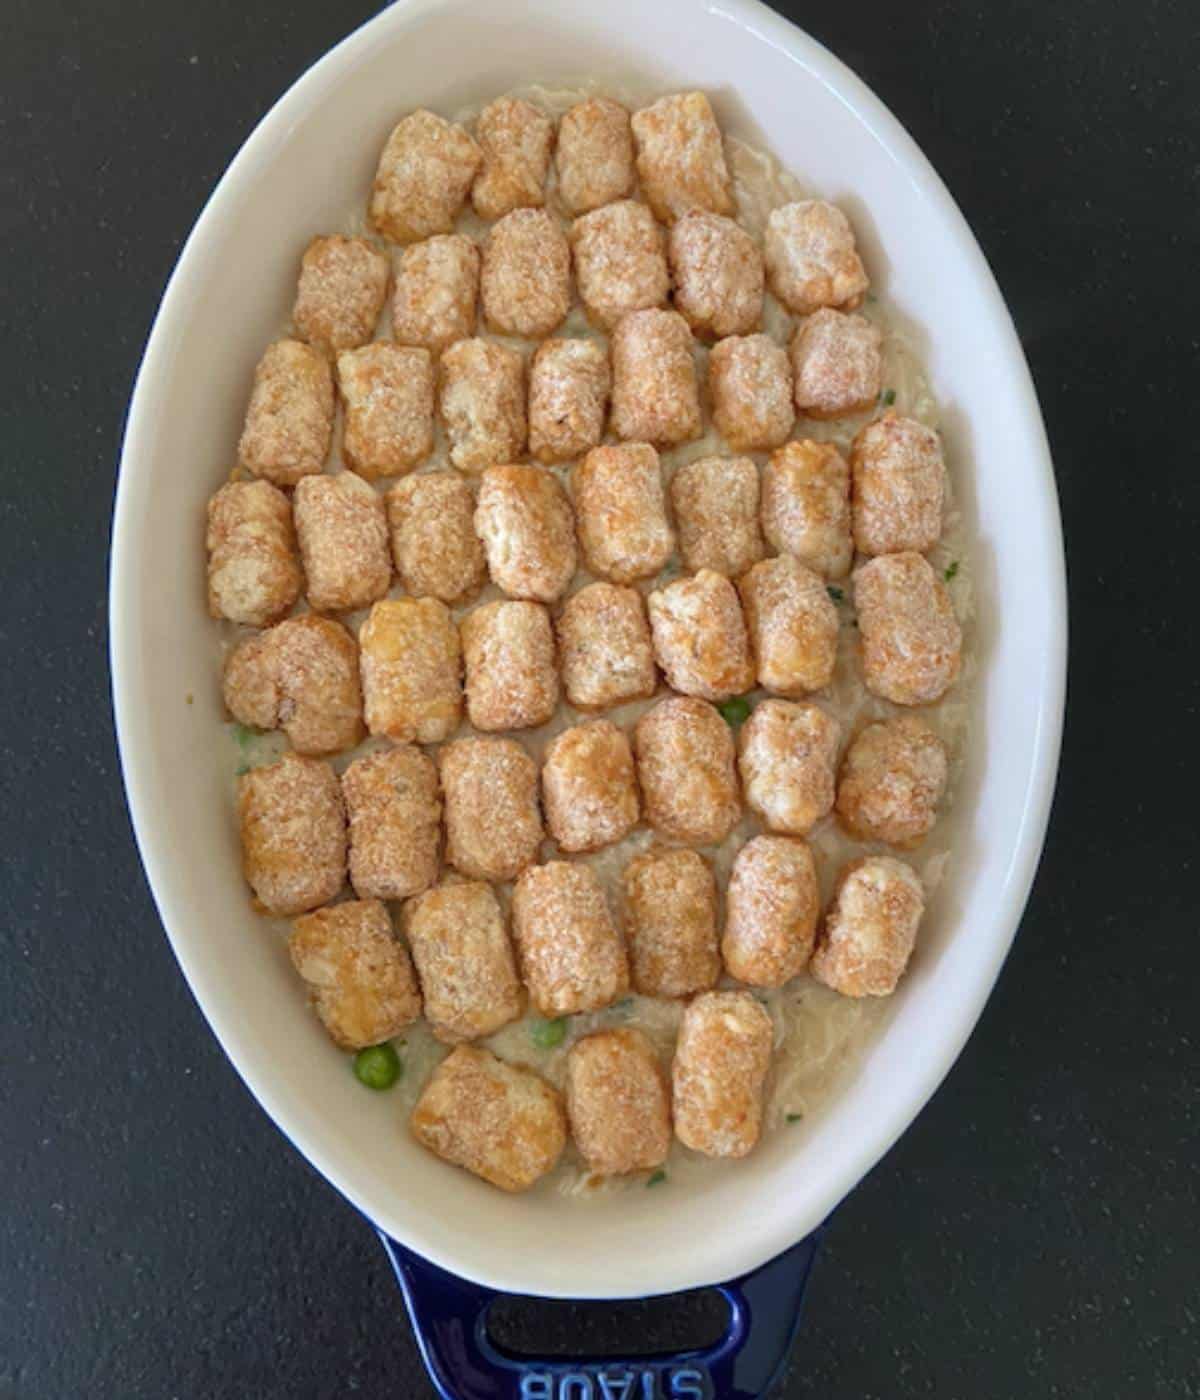 Tater tots topped on casserole dish.